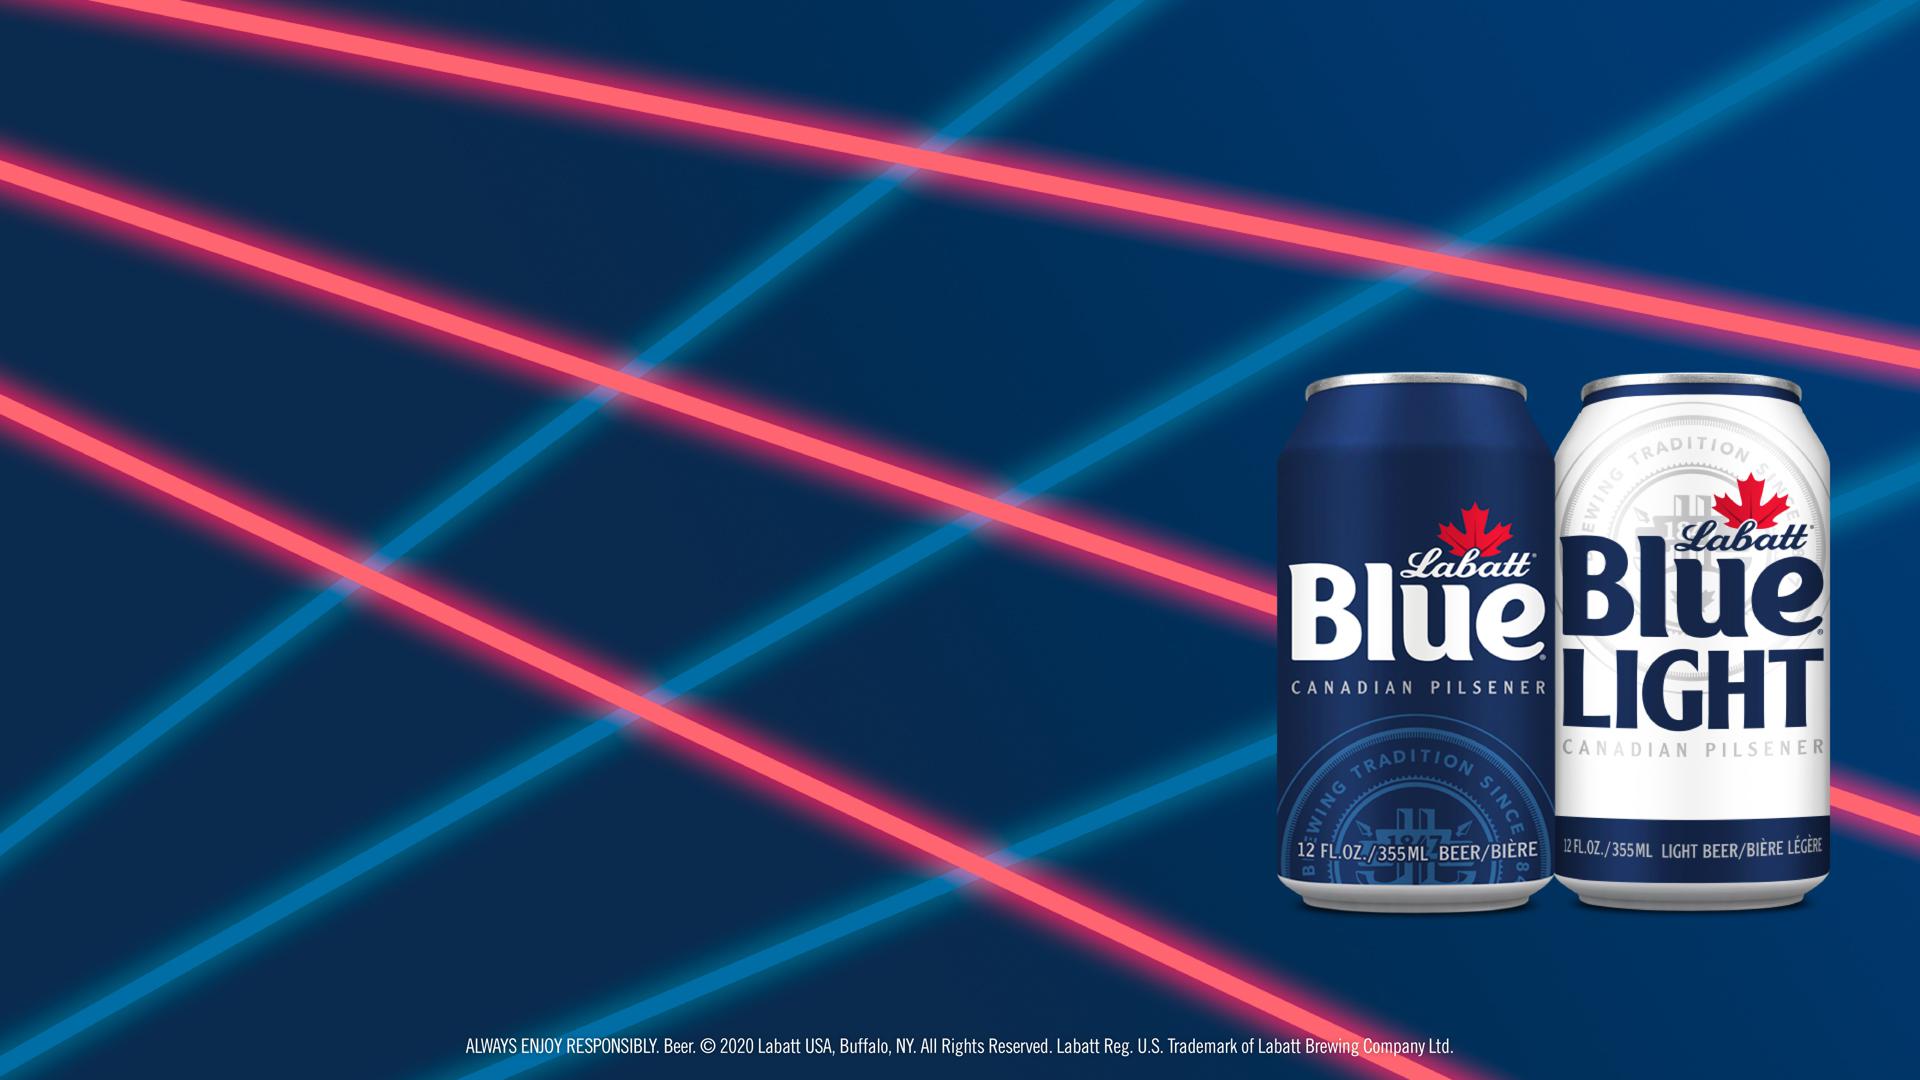 Blue and Blue Light Cans in front of an ’80s Lasers Background